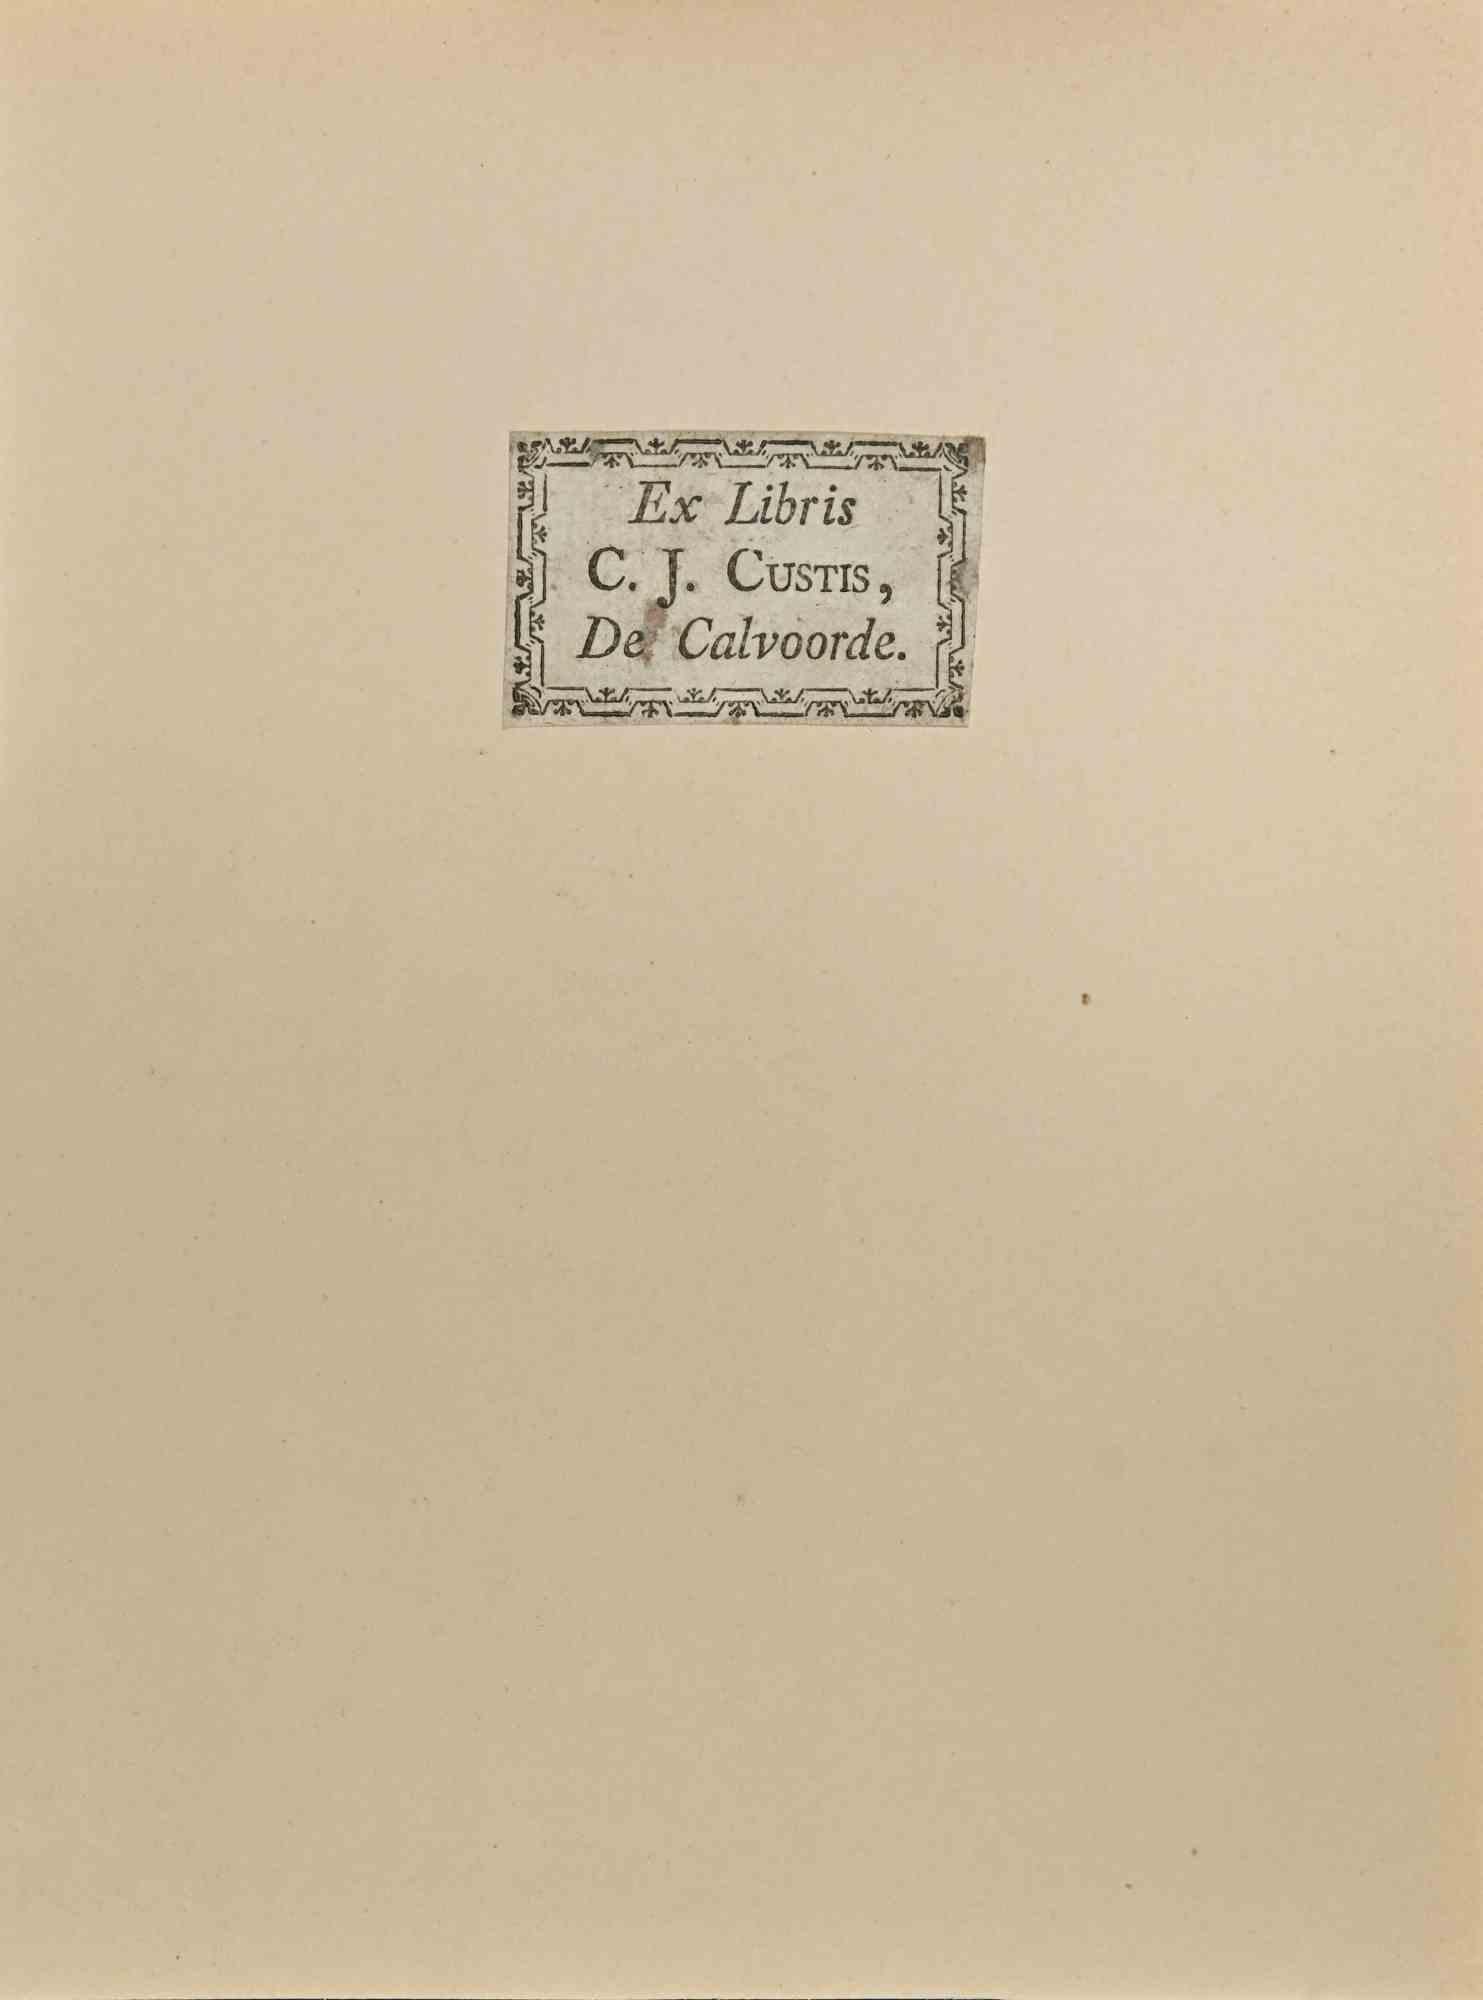 Ex libris C.J. Custis, de Calvoorde is an Artwork realized in 19th Century, by the Author Johann Friedrich Christ.

Woodcut B./W. print on paper. The work is glued on ivory cardboard.

Total dimensions: 20 x 15 cm.

Good conditions.

The artwork